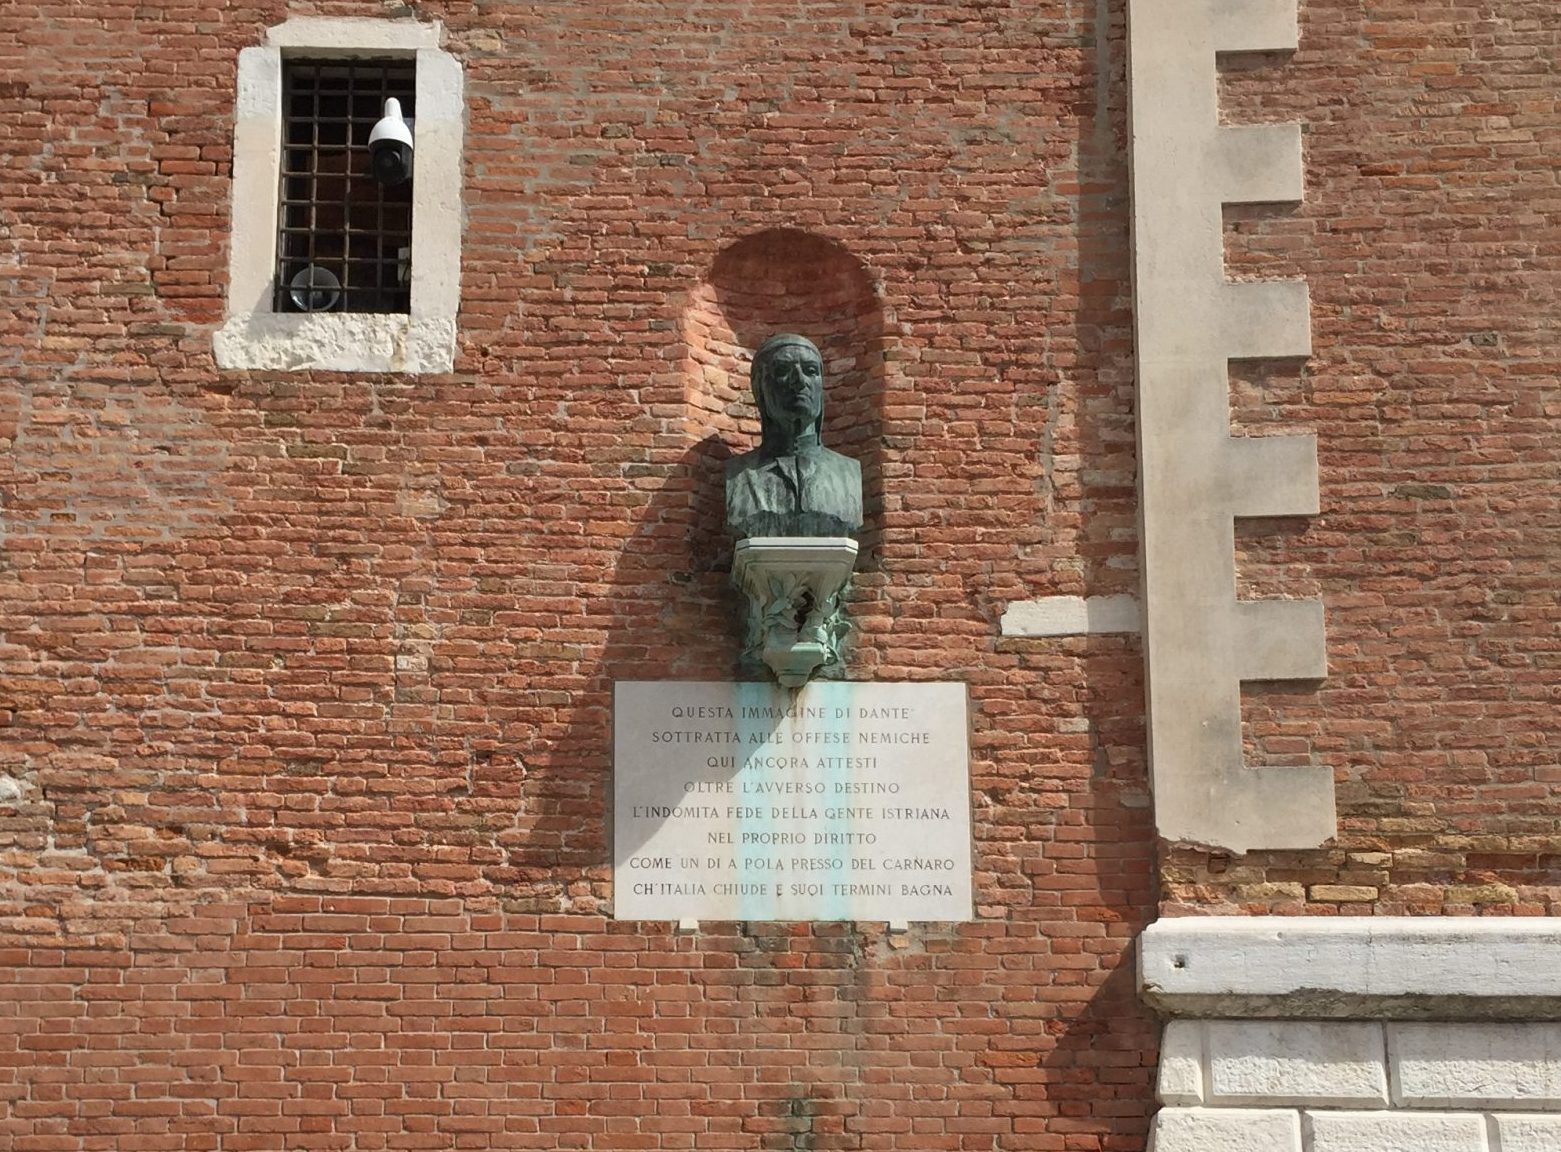 Bust of Dante Alighieri near the gate of the Arsenale of Venice